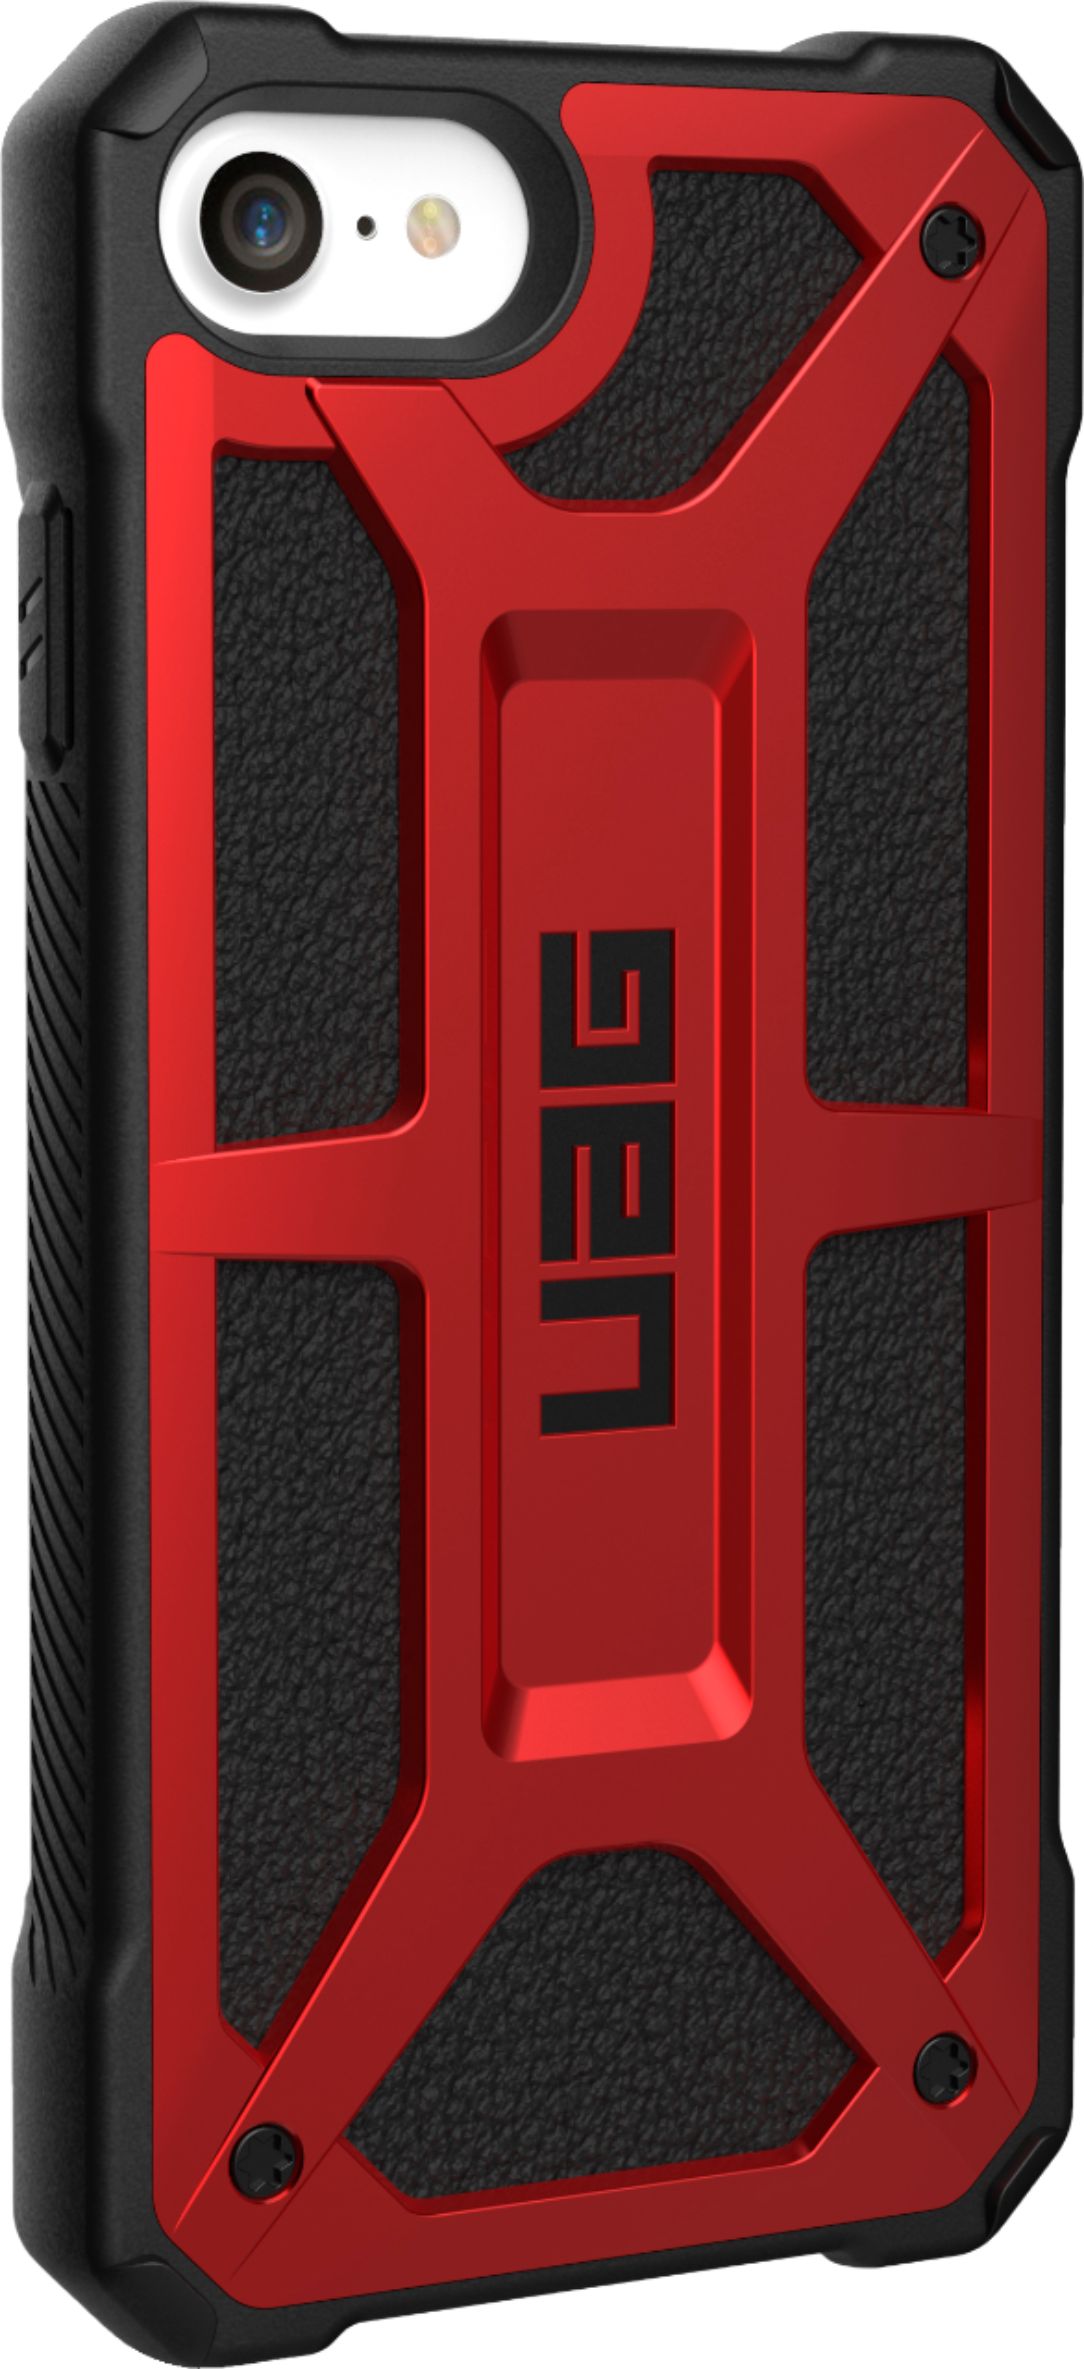 Angle View: UAG - Monarch Series Case for Apple® iPhone® 7, 8 and SE (2nd Generation) - Crimson (Red)